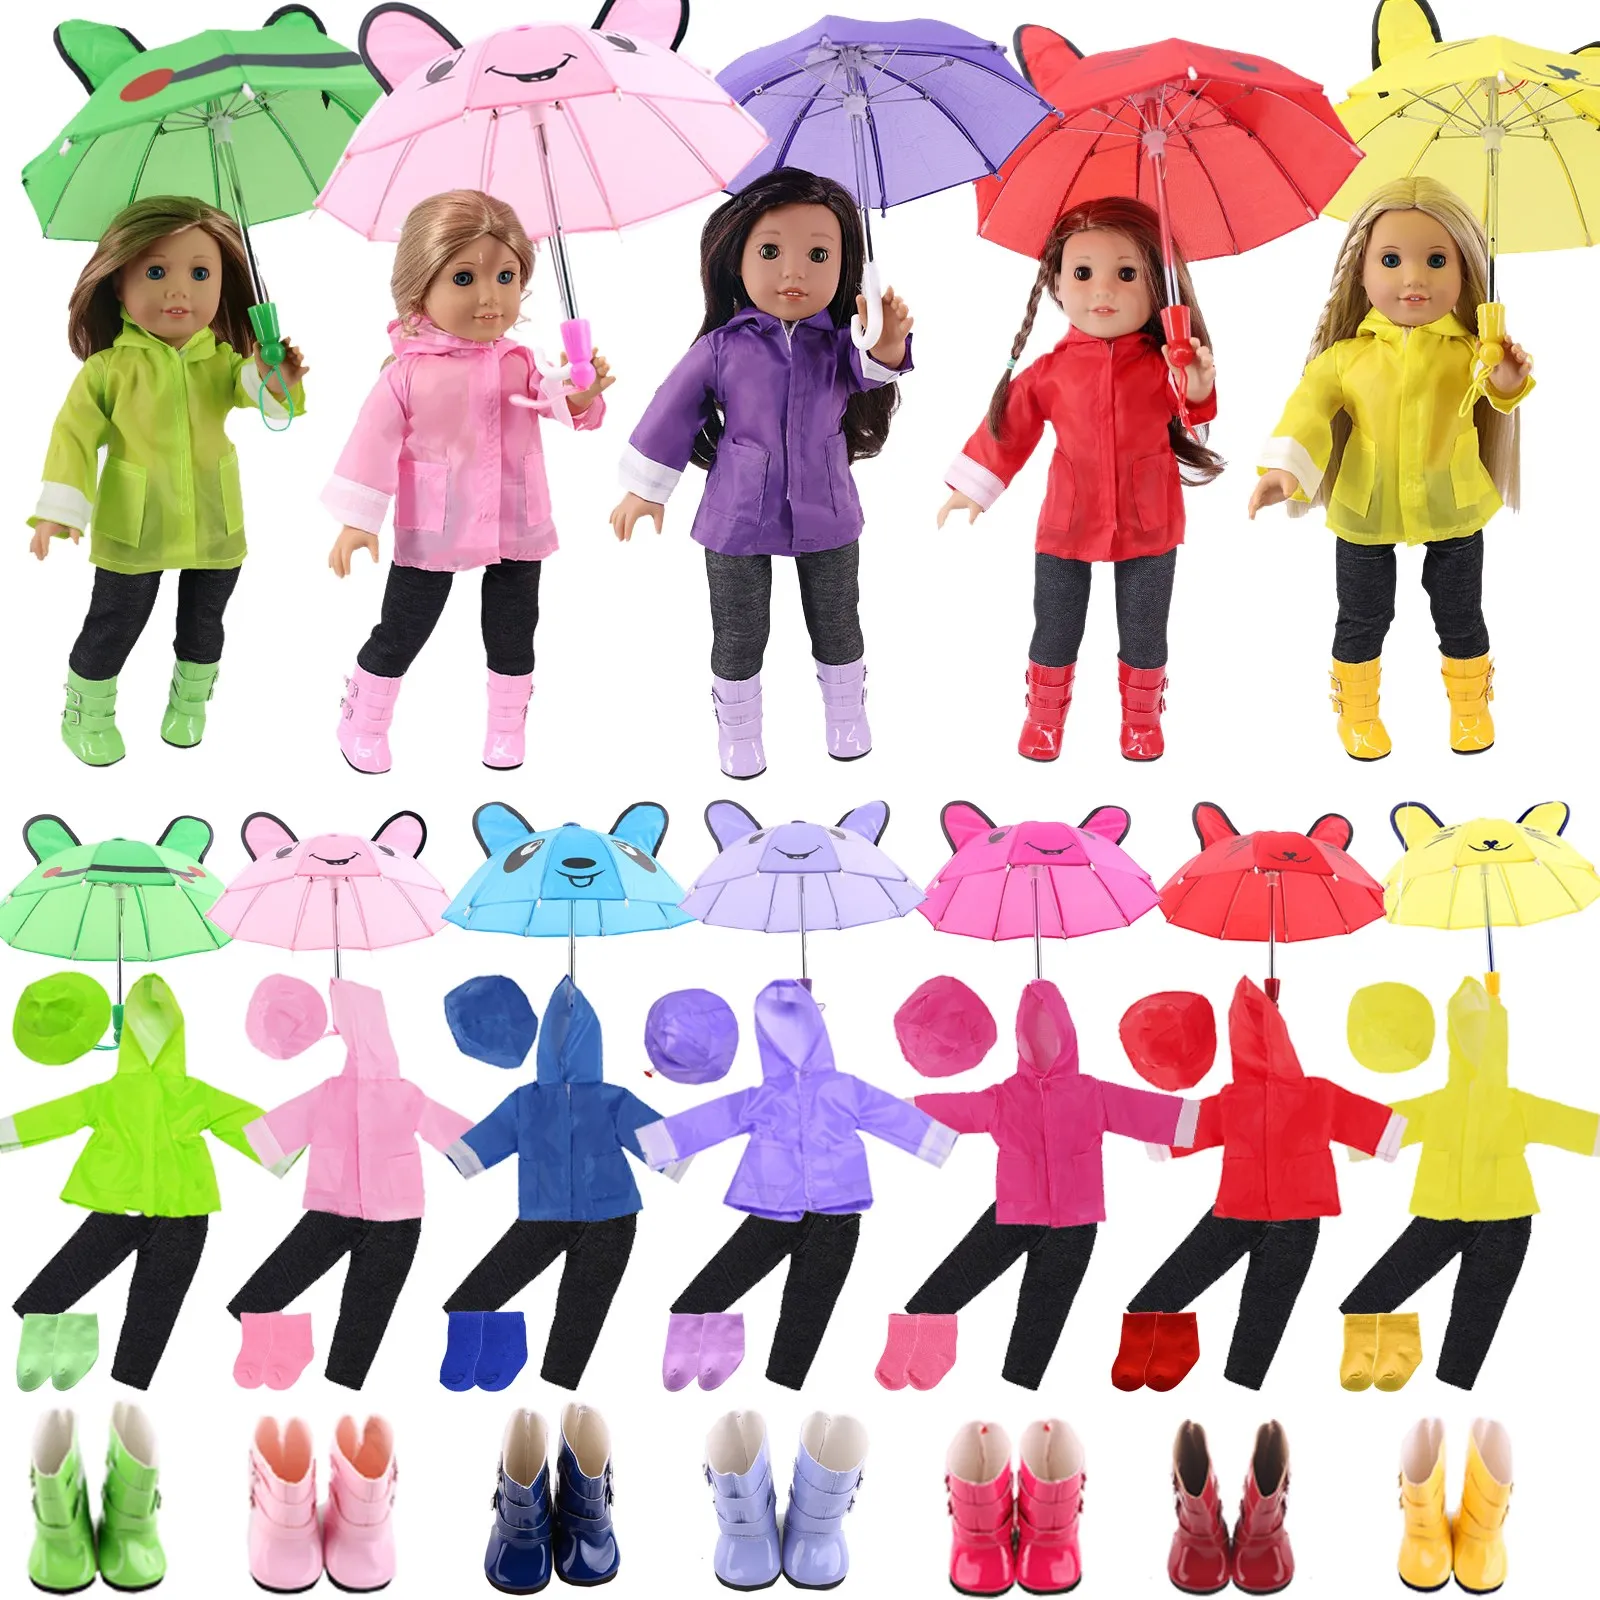 4-Piece Doll Rain Clothes Shoes Accessories Raincoat Rainboots Umbrella Fit 18inch Girl Doll43cmReborn Baby Our Generation Gift